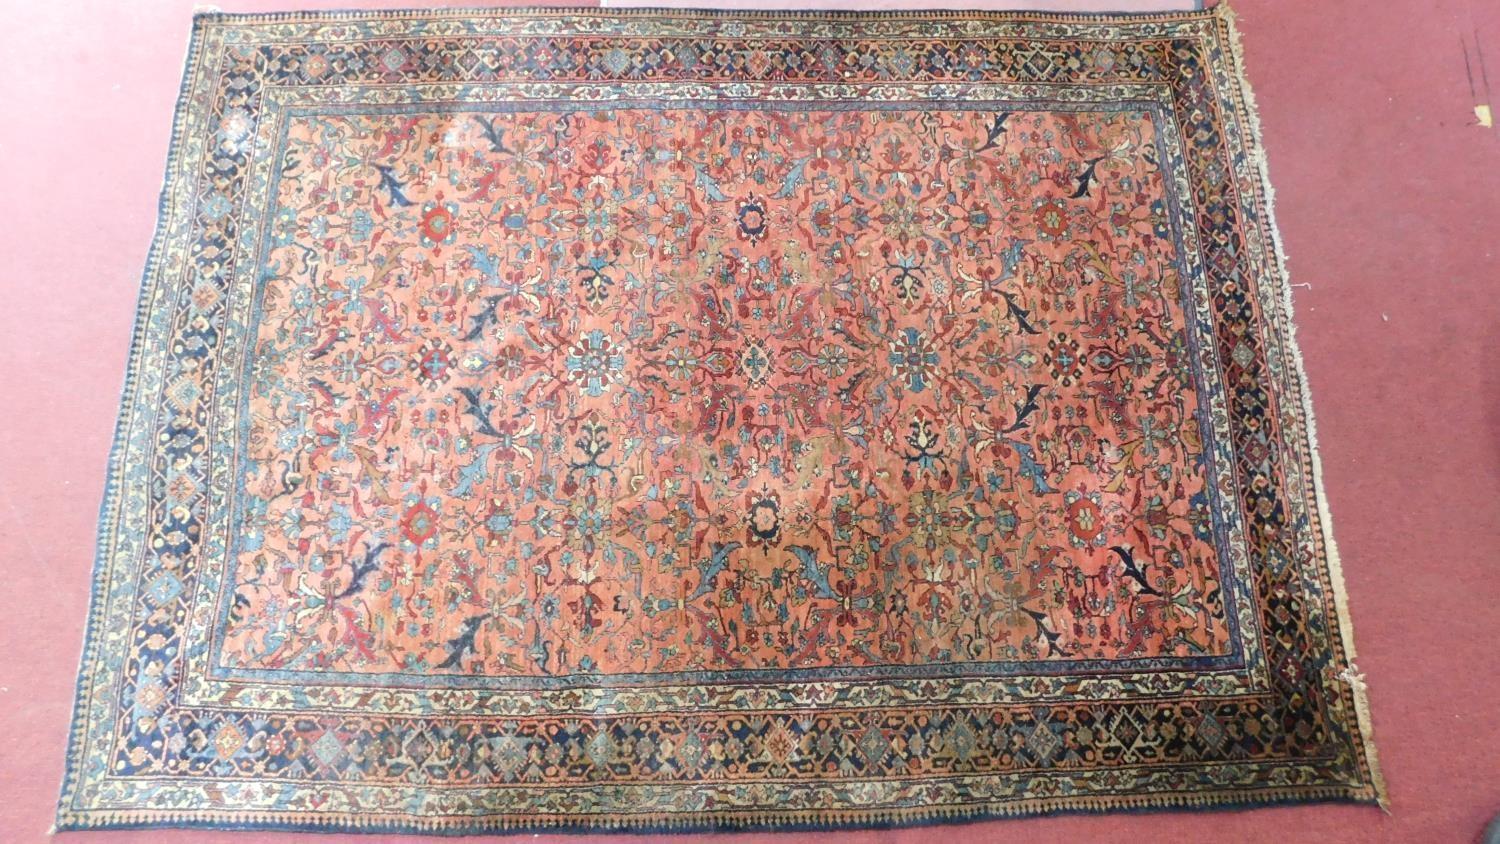 A large Persian rug with repeat motifs on a rouge back ground surrounded by a stylised floral and